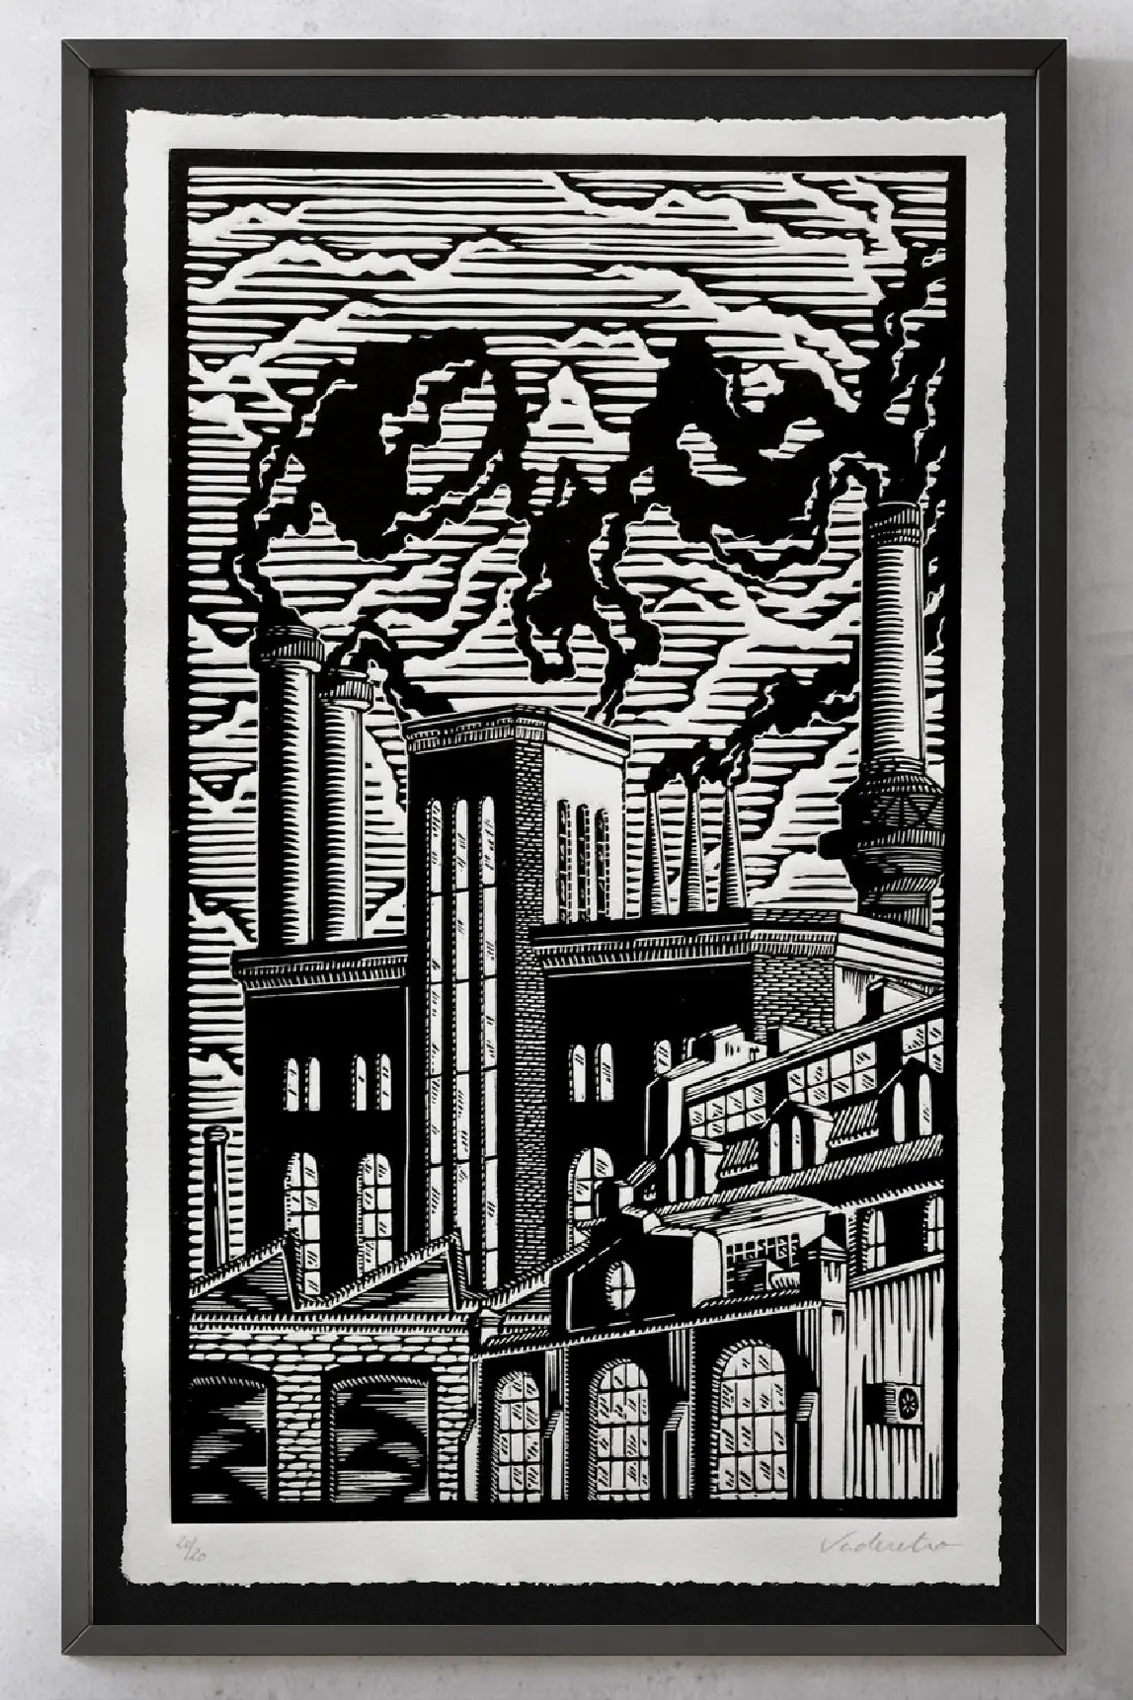 Death at the factory linocut